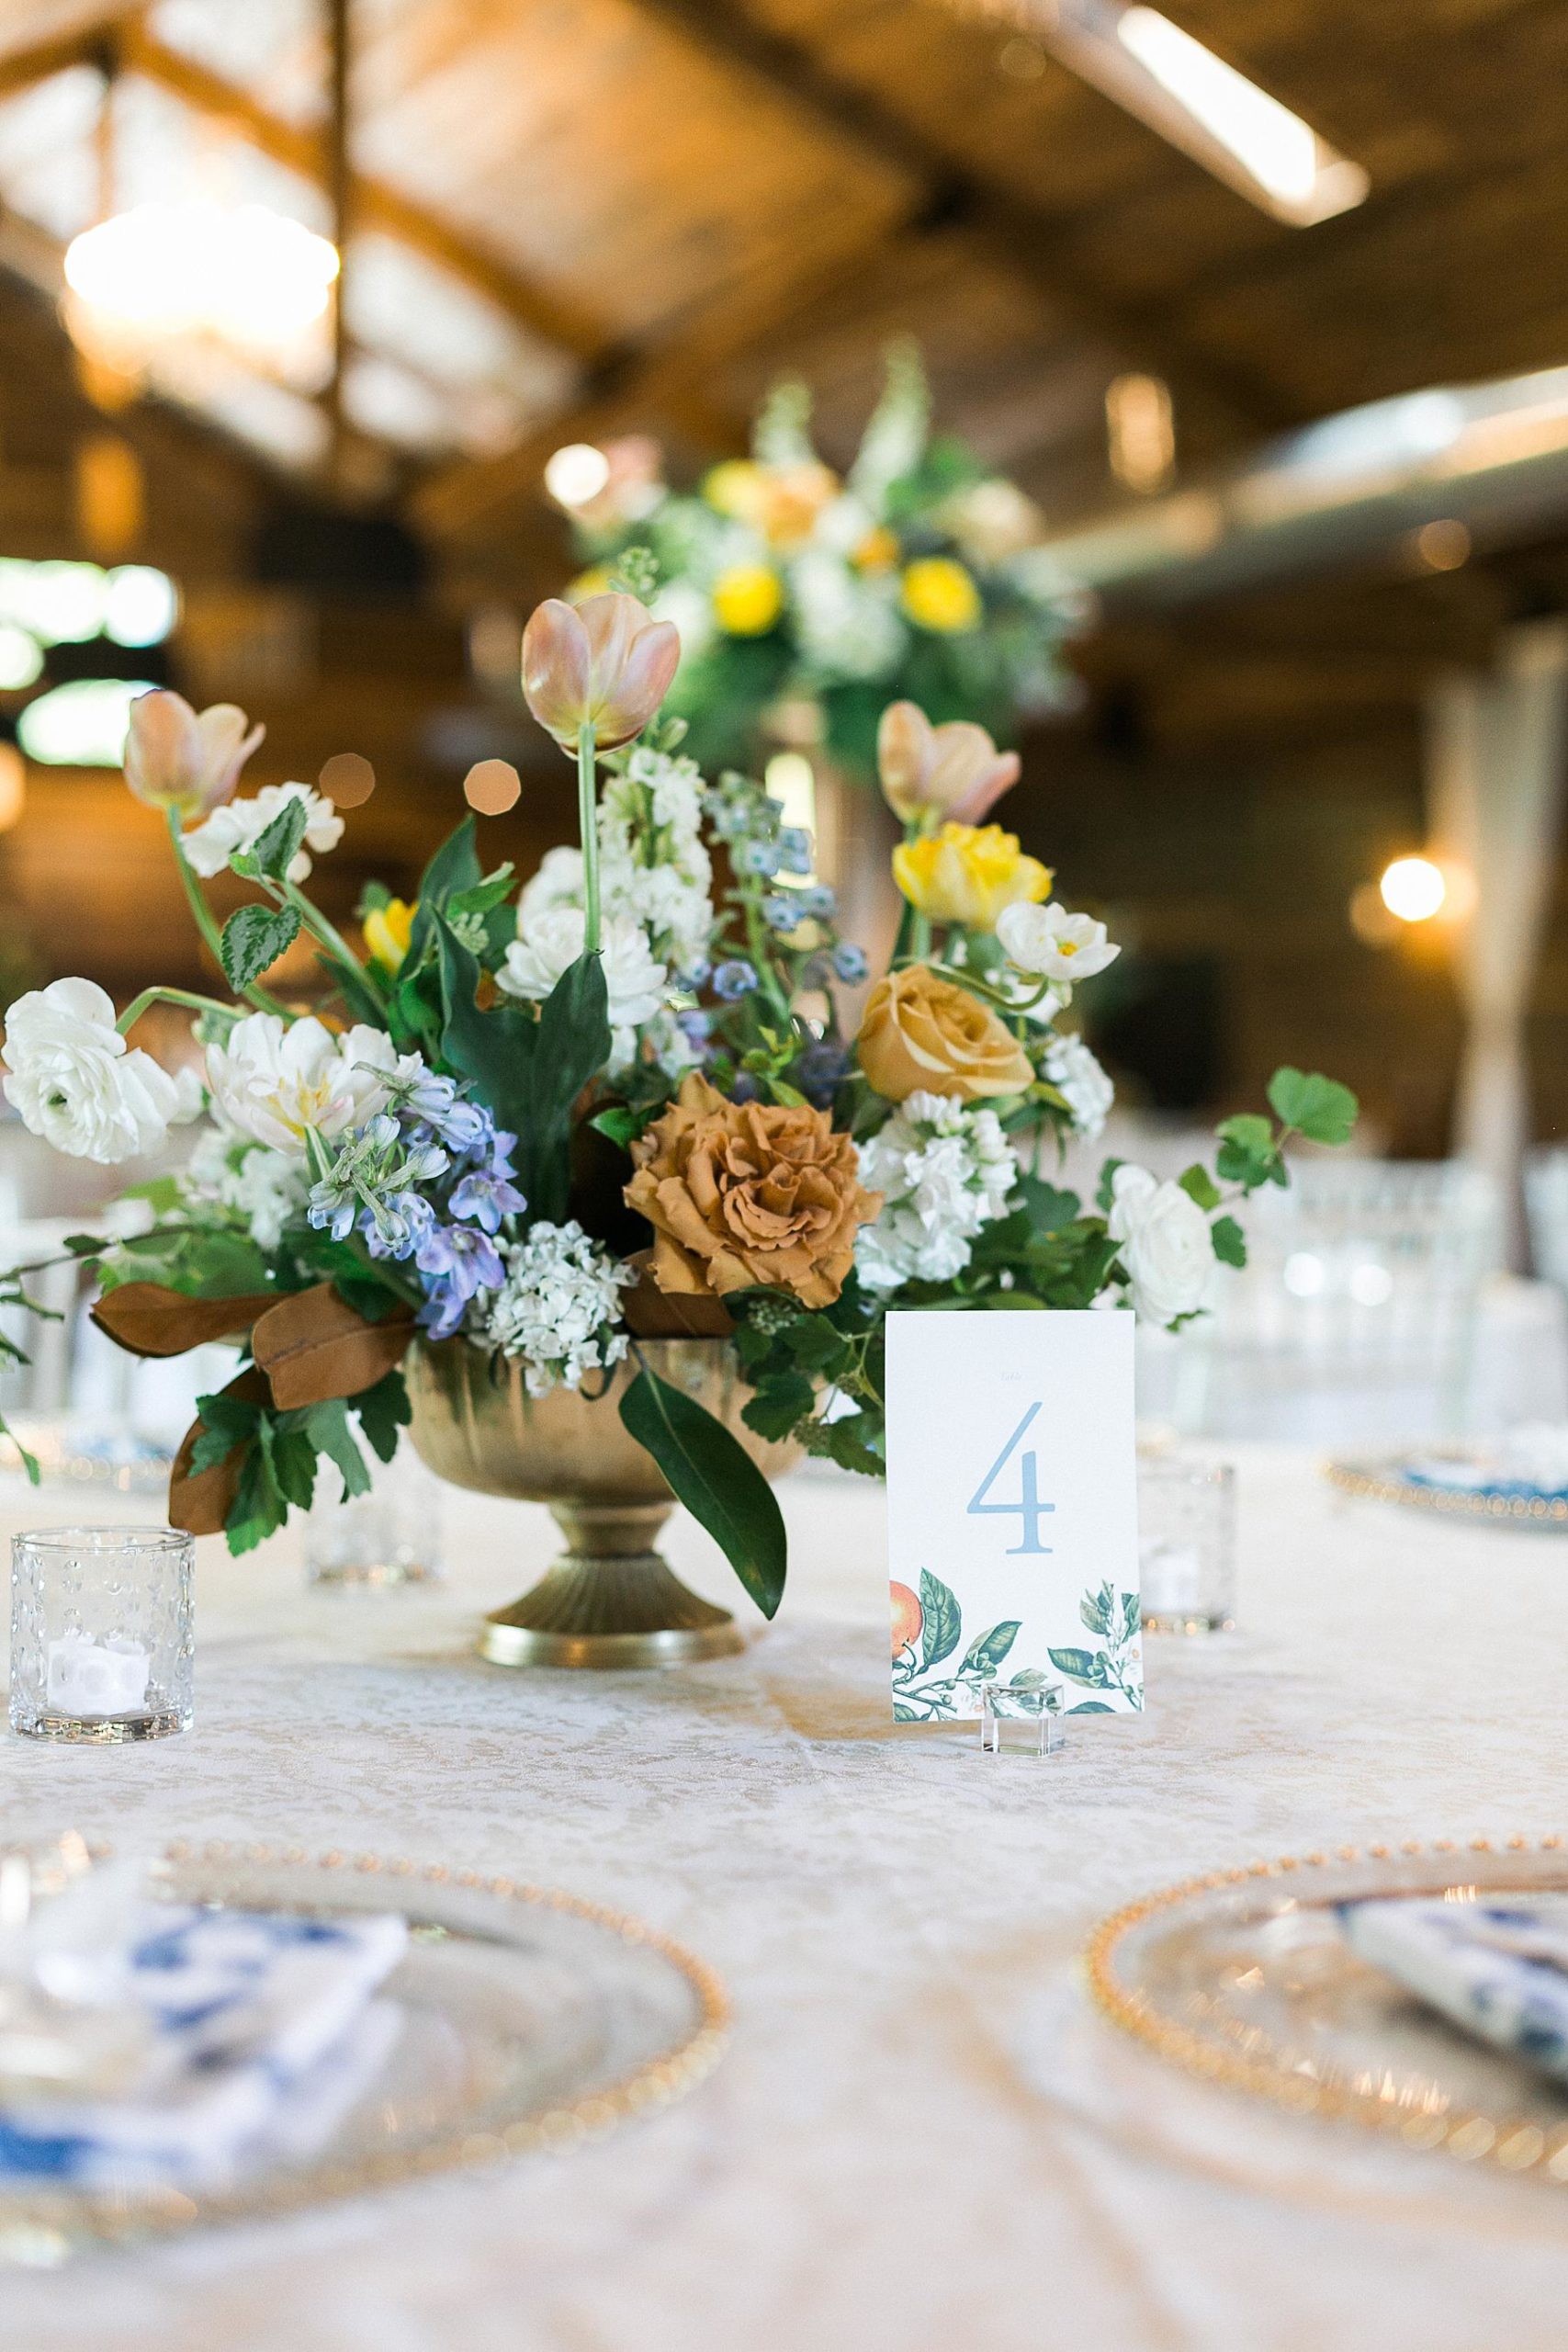 refined upscale barn wedding reception decor with yellow, orange, and blue florals fields reserve near madison, wisconsin